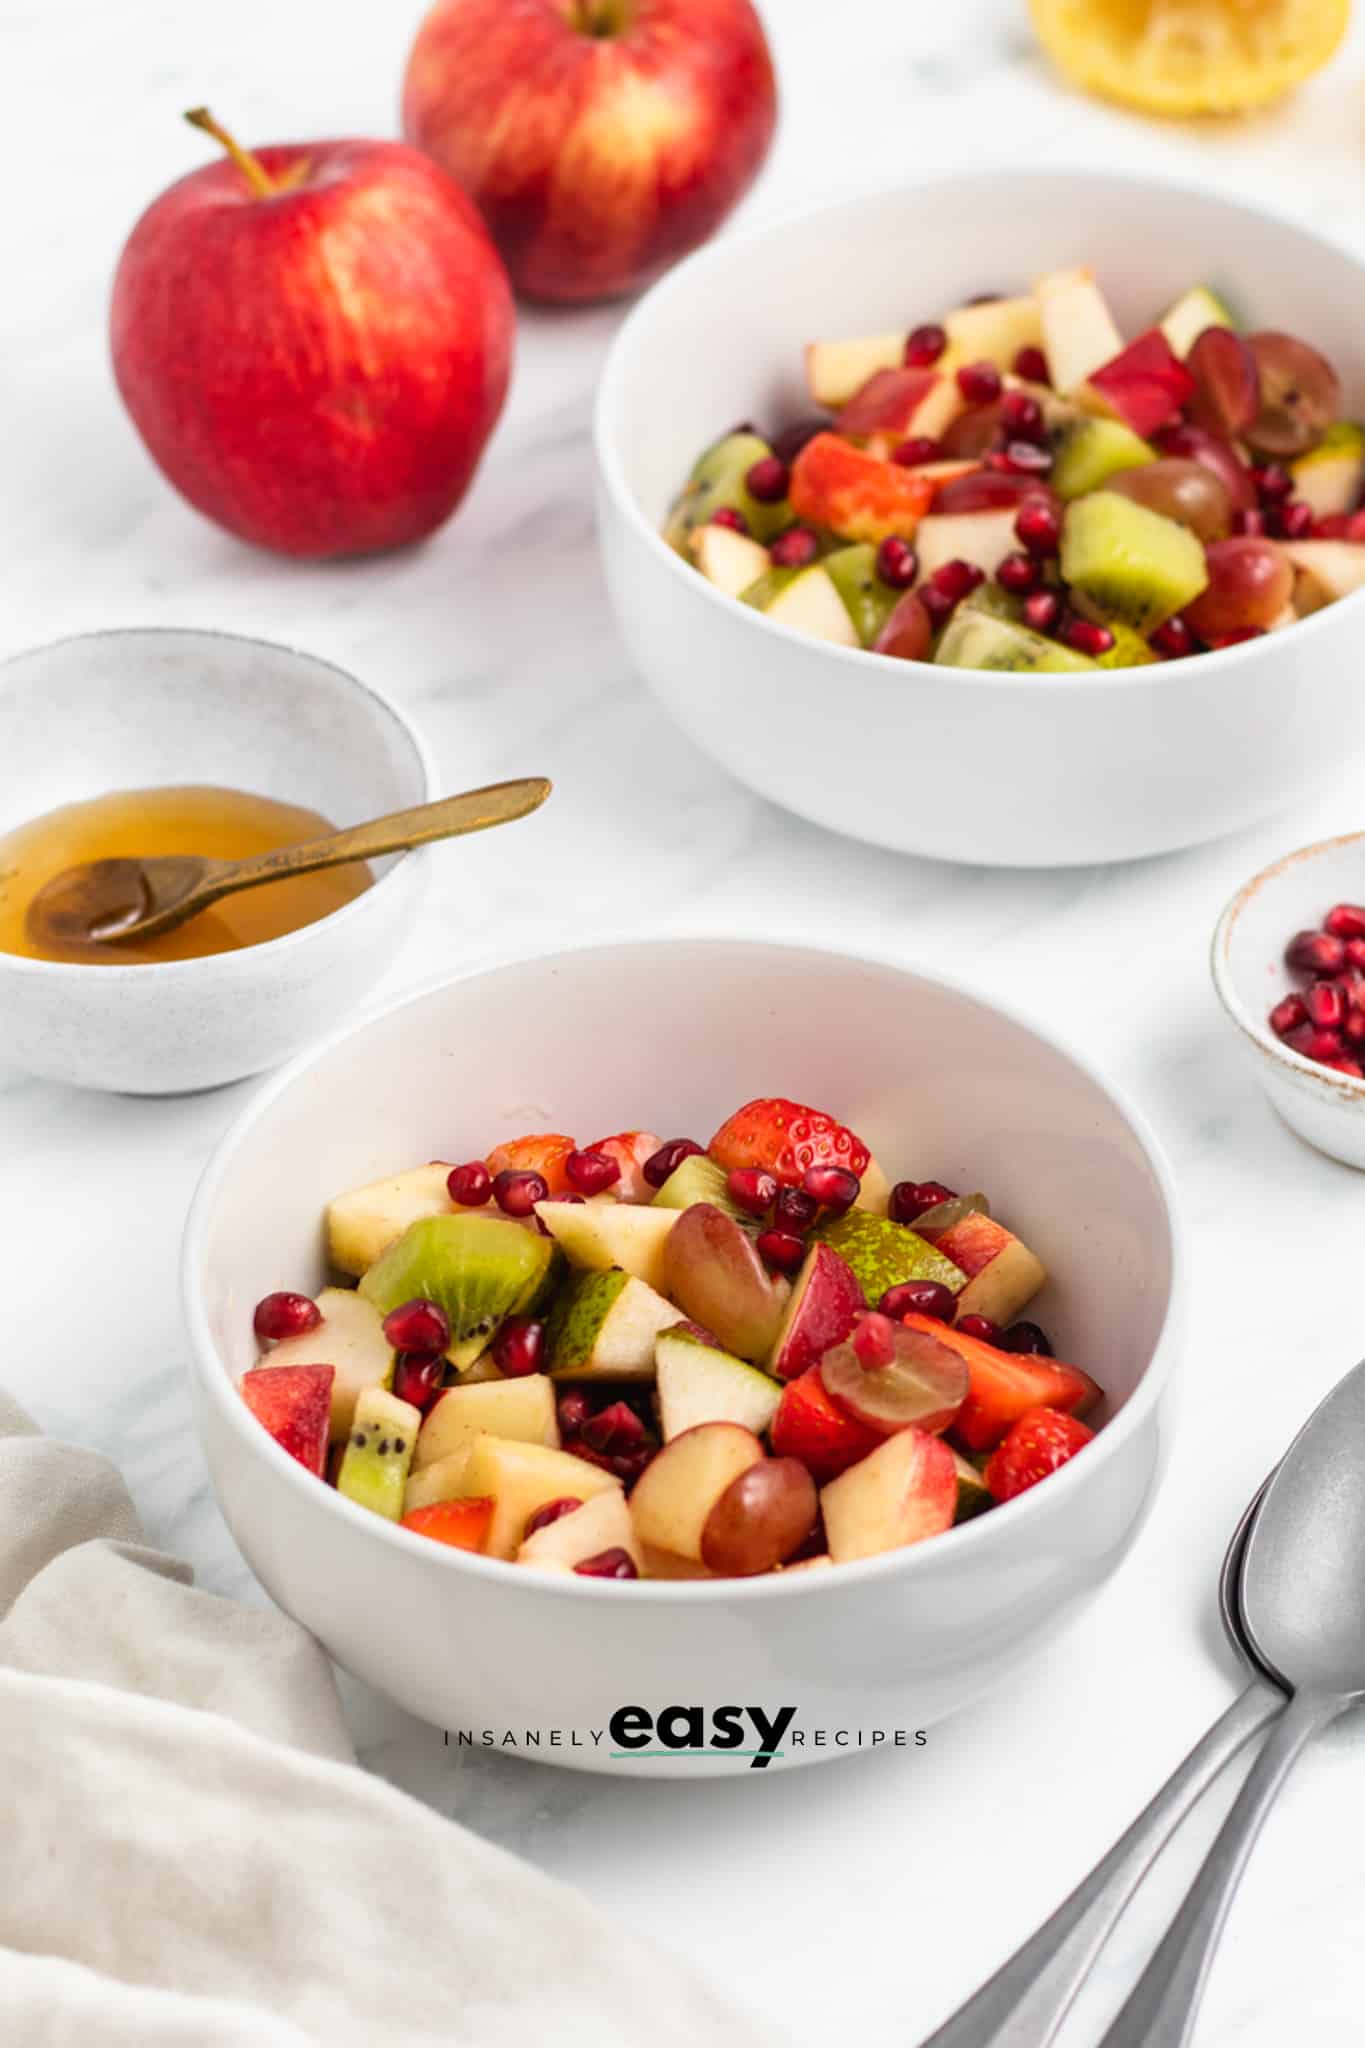 Photo of 2 servings of Thanksgiving Fruit Salad in two white bowls. There is a white bowl with honey and a small white bowl with pomegranate seeds by the salad. And there are two red apples in the background.  